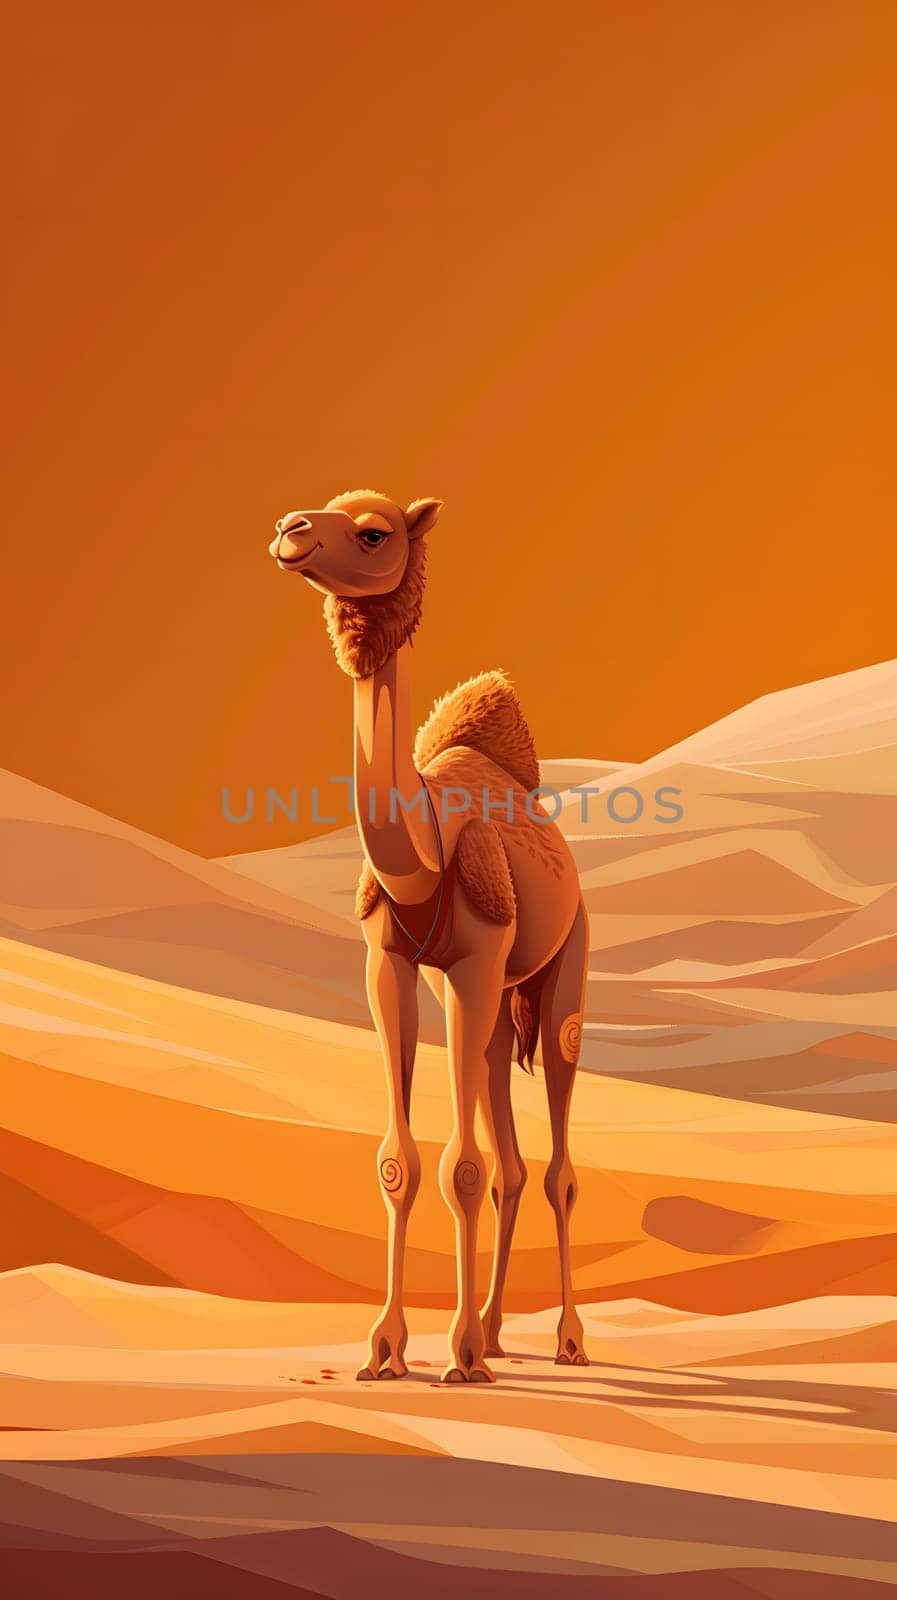 A Camel, a Camelid terrestrial animal, stands in the middle of an erg, an aeolian landform in the desert. The fawncolored animal contrasts with the golden sand under a vast blue sky